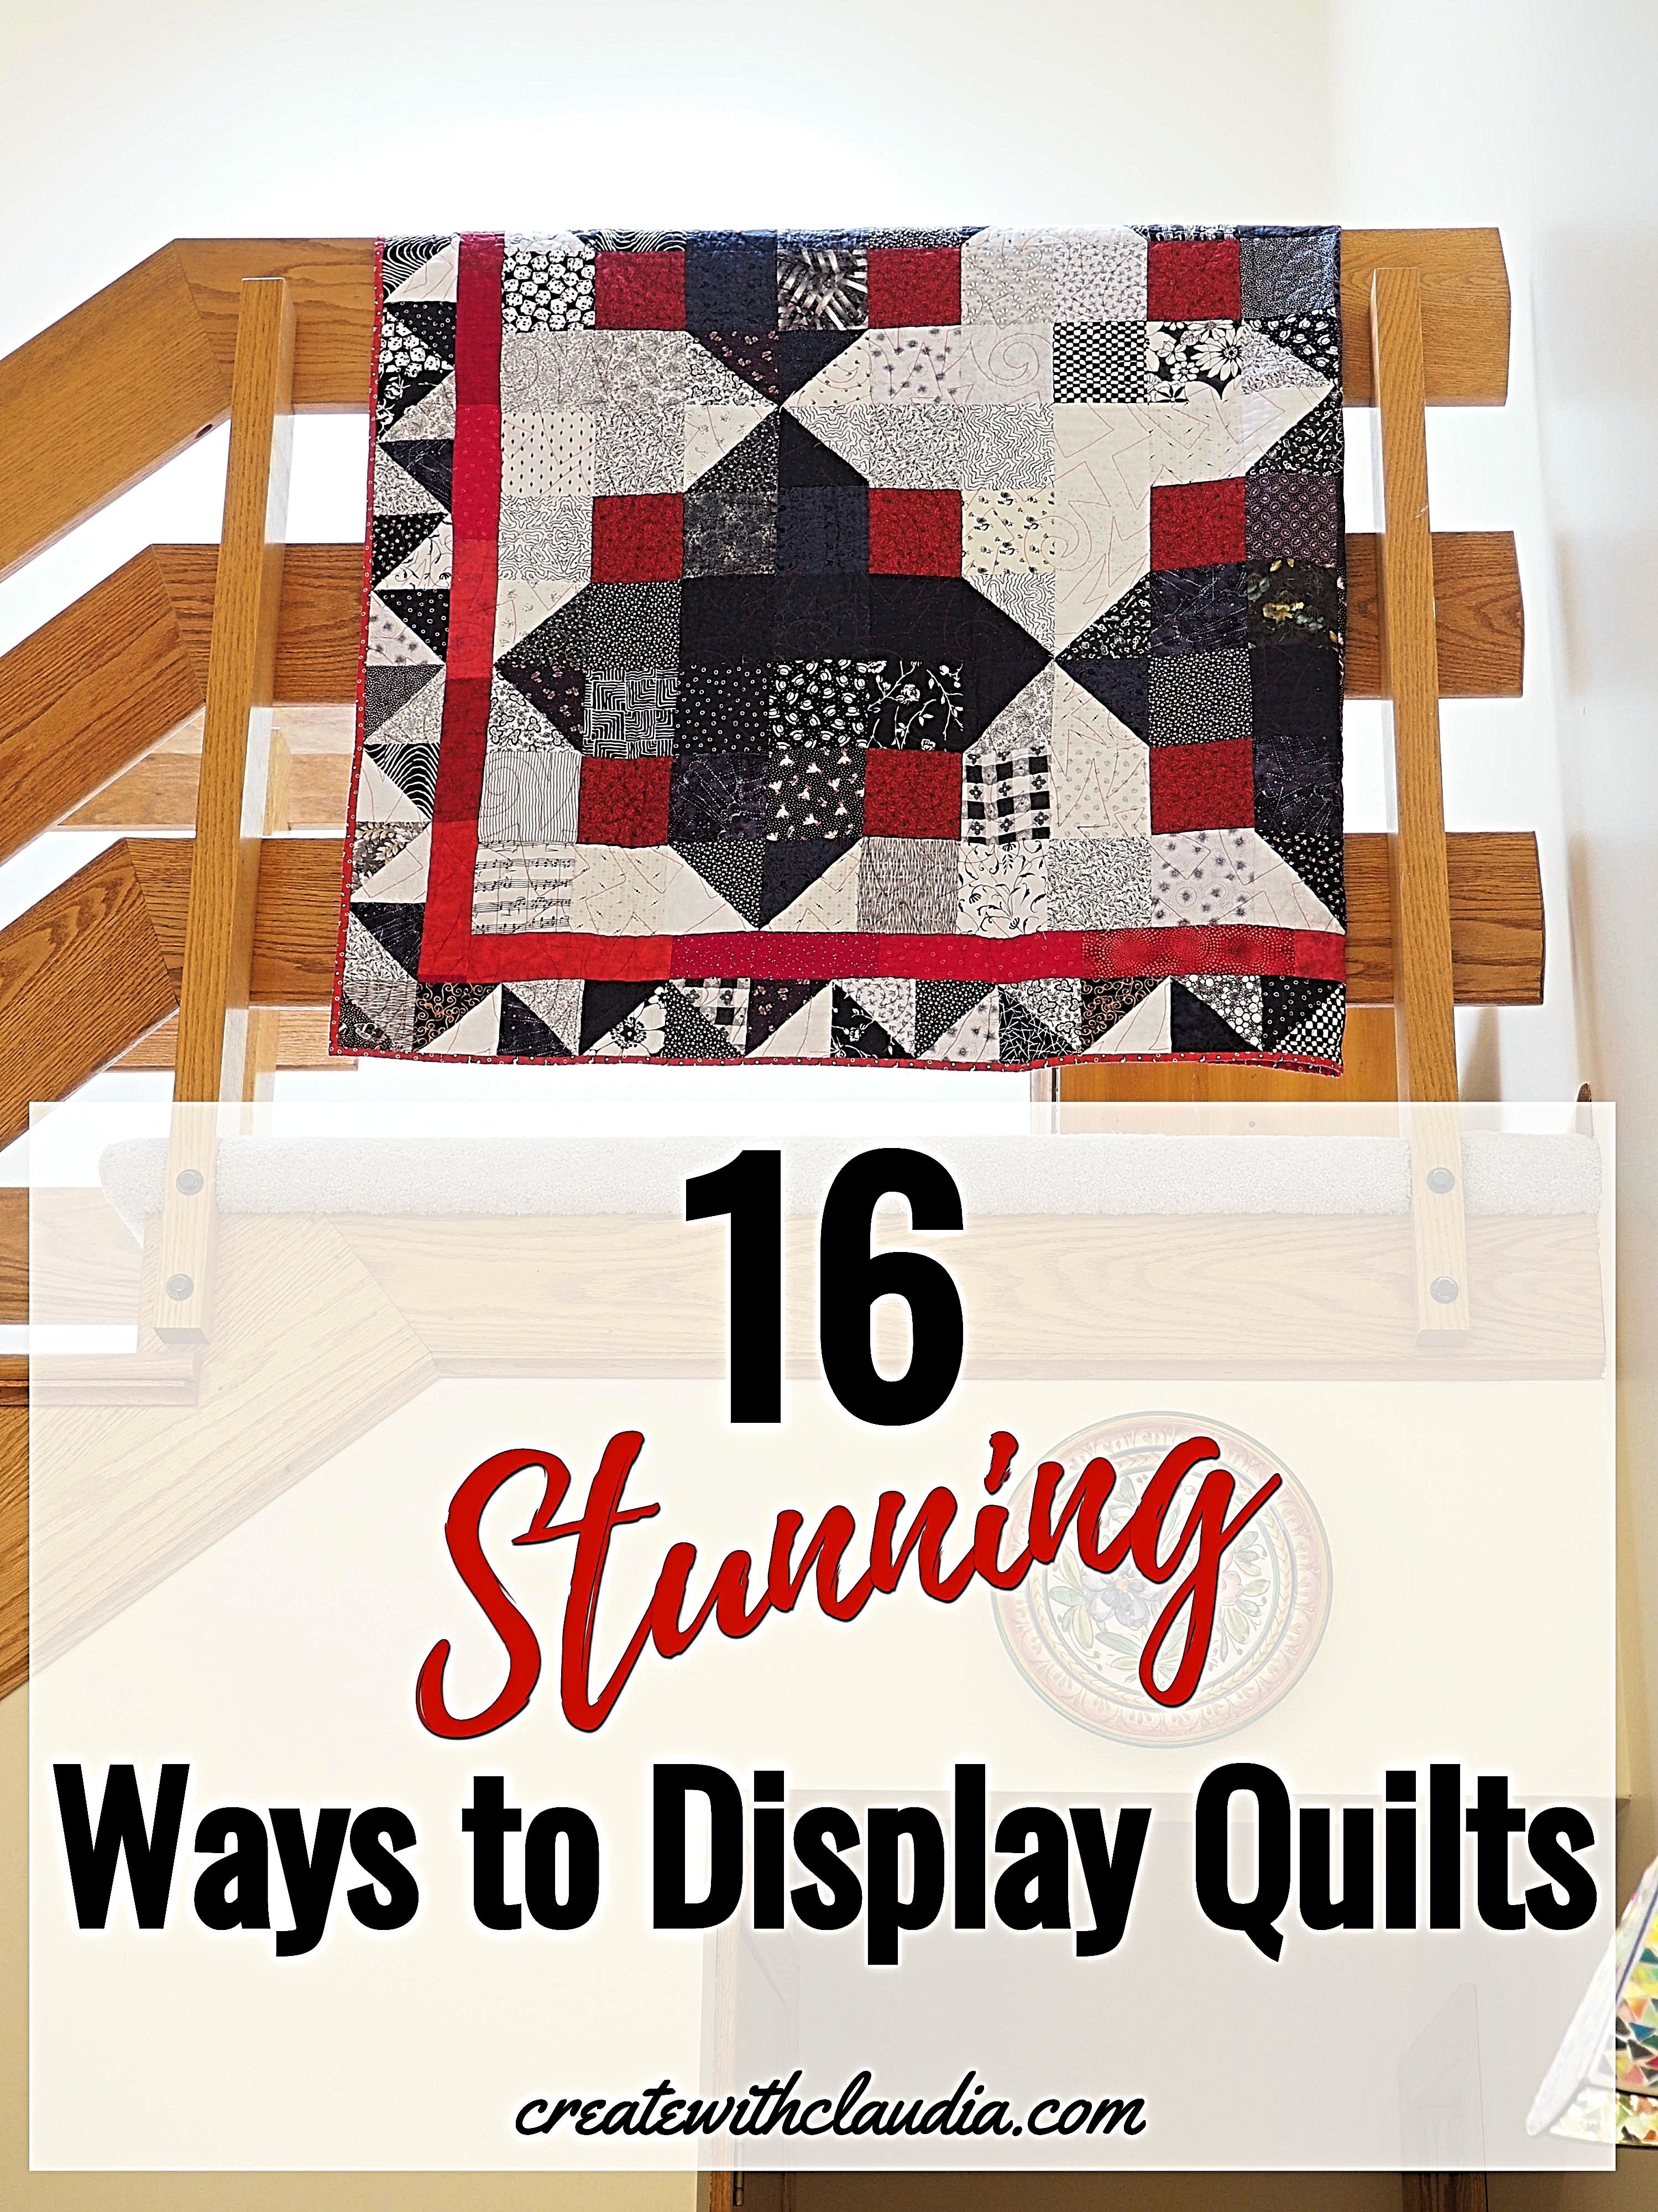 Need some quilt hanging ideas? Using dowel rods is one of many